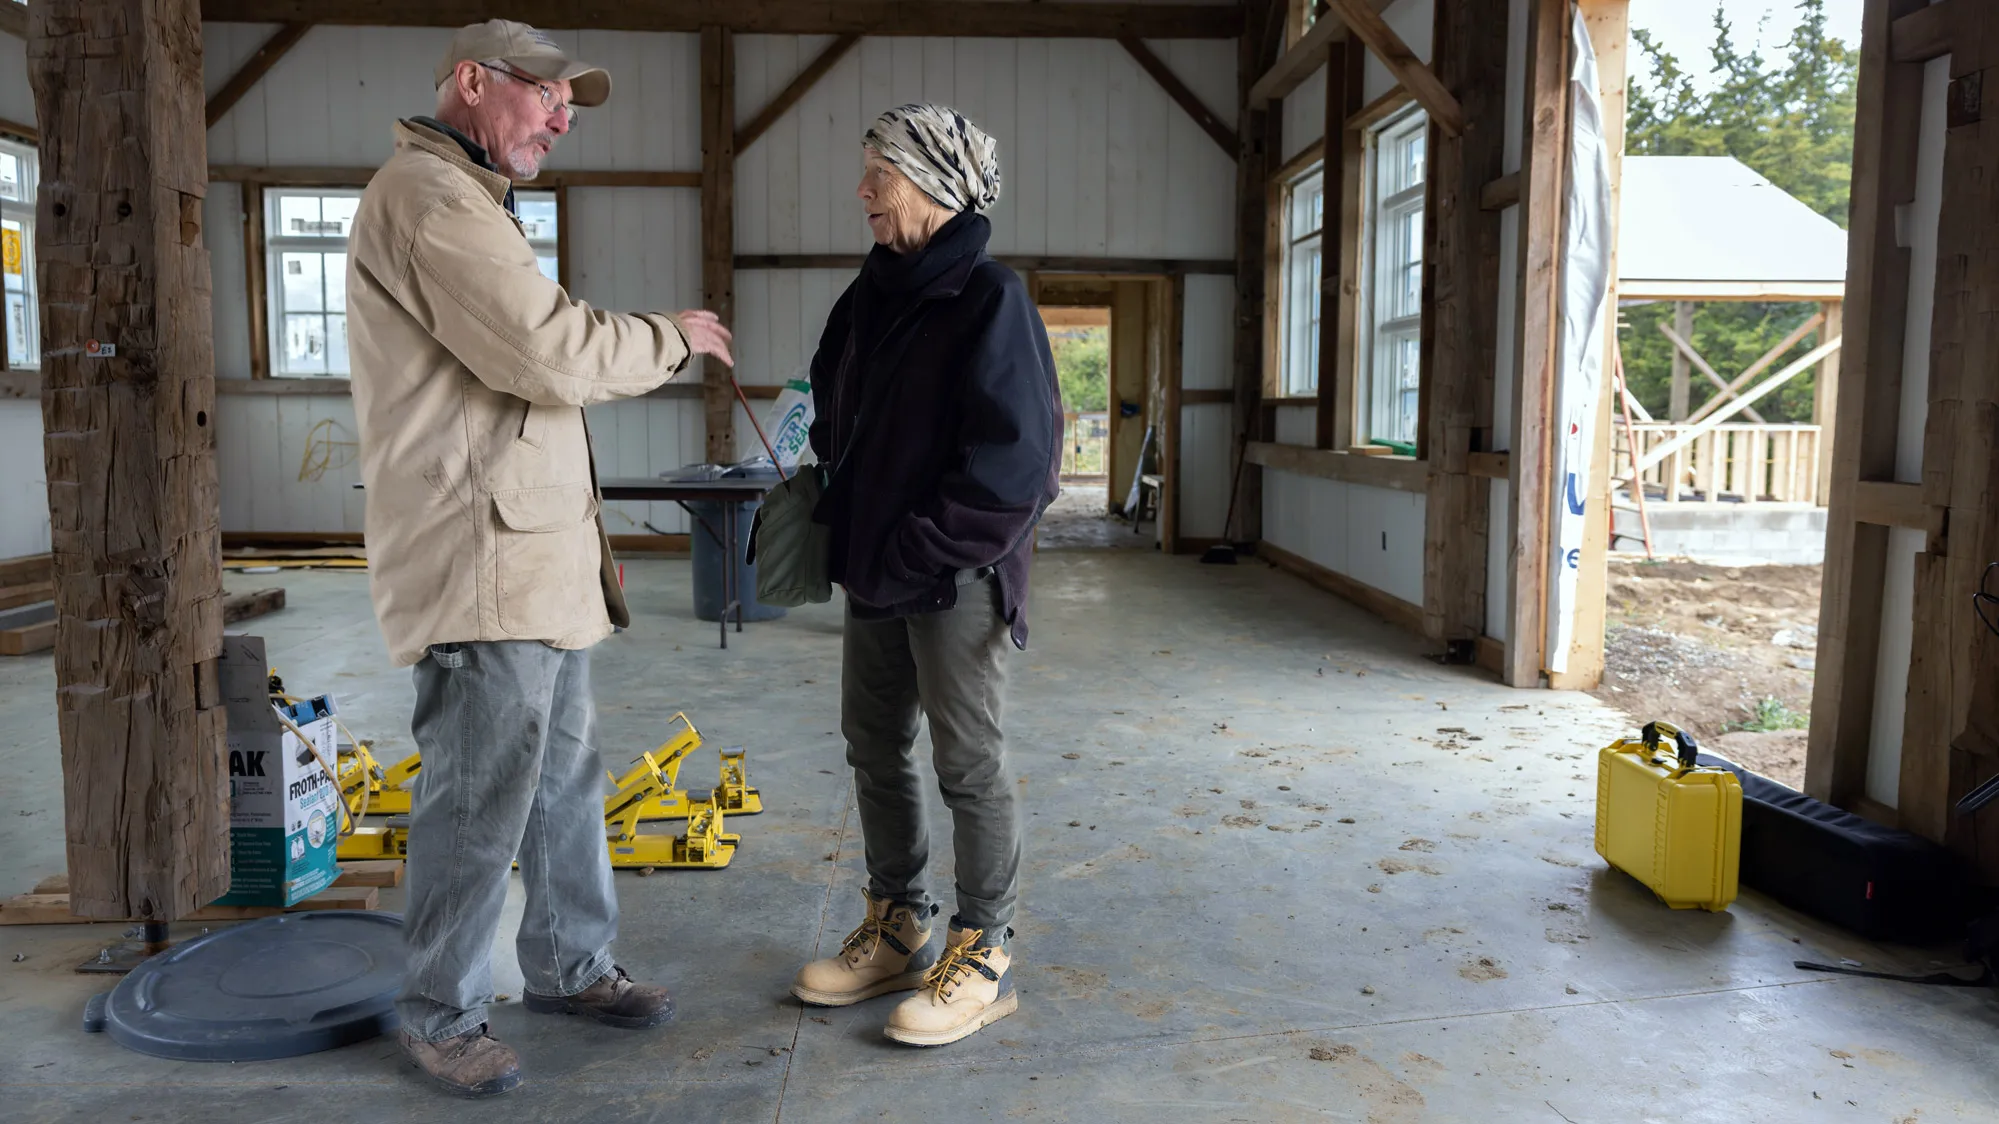 Inside the barn that is under construction, Doug Morgan gestures as he talks with an older woman wearing a hat and fall windbreaker. Around them, there is some workers’ equipment, the floor is marked by muddy boot prints and the walls are primered a bright white. 